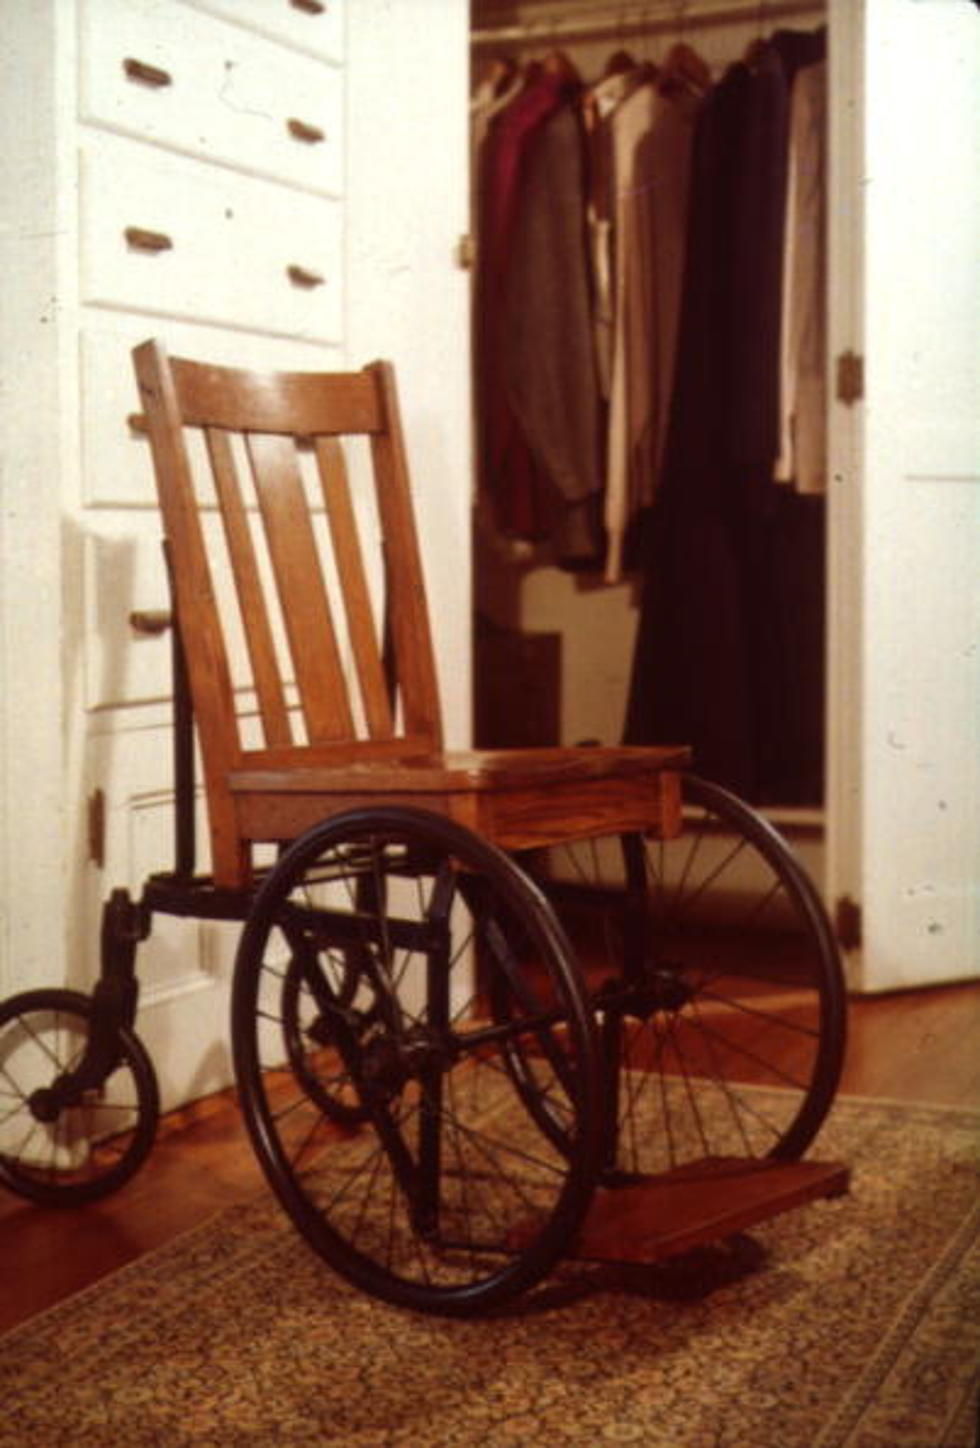 73 Year Old Man’s Wheelchair Is Stolen And Scrapped For $2.69 By Thieves